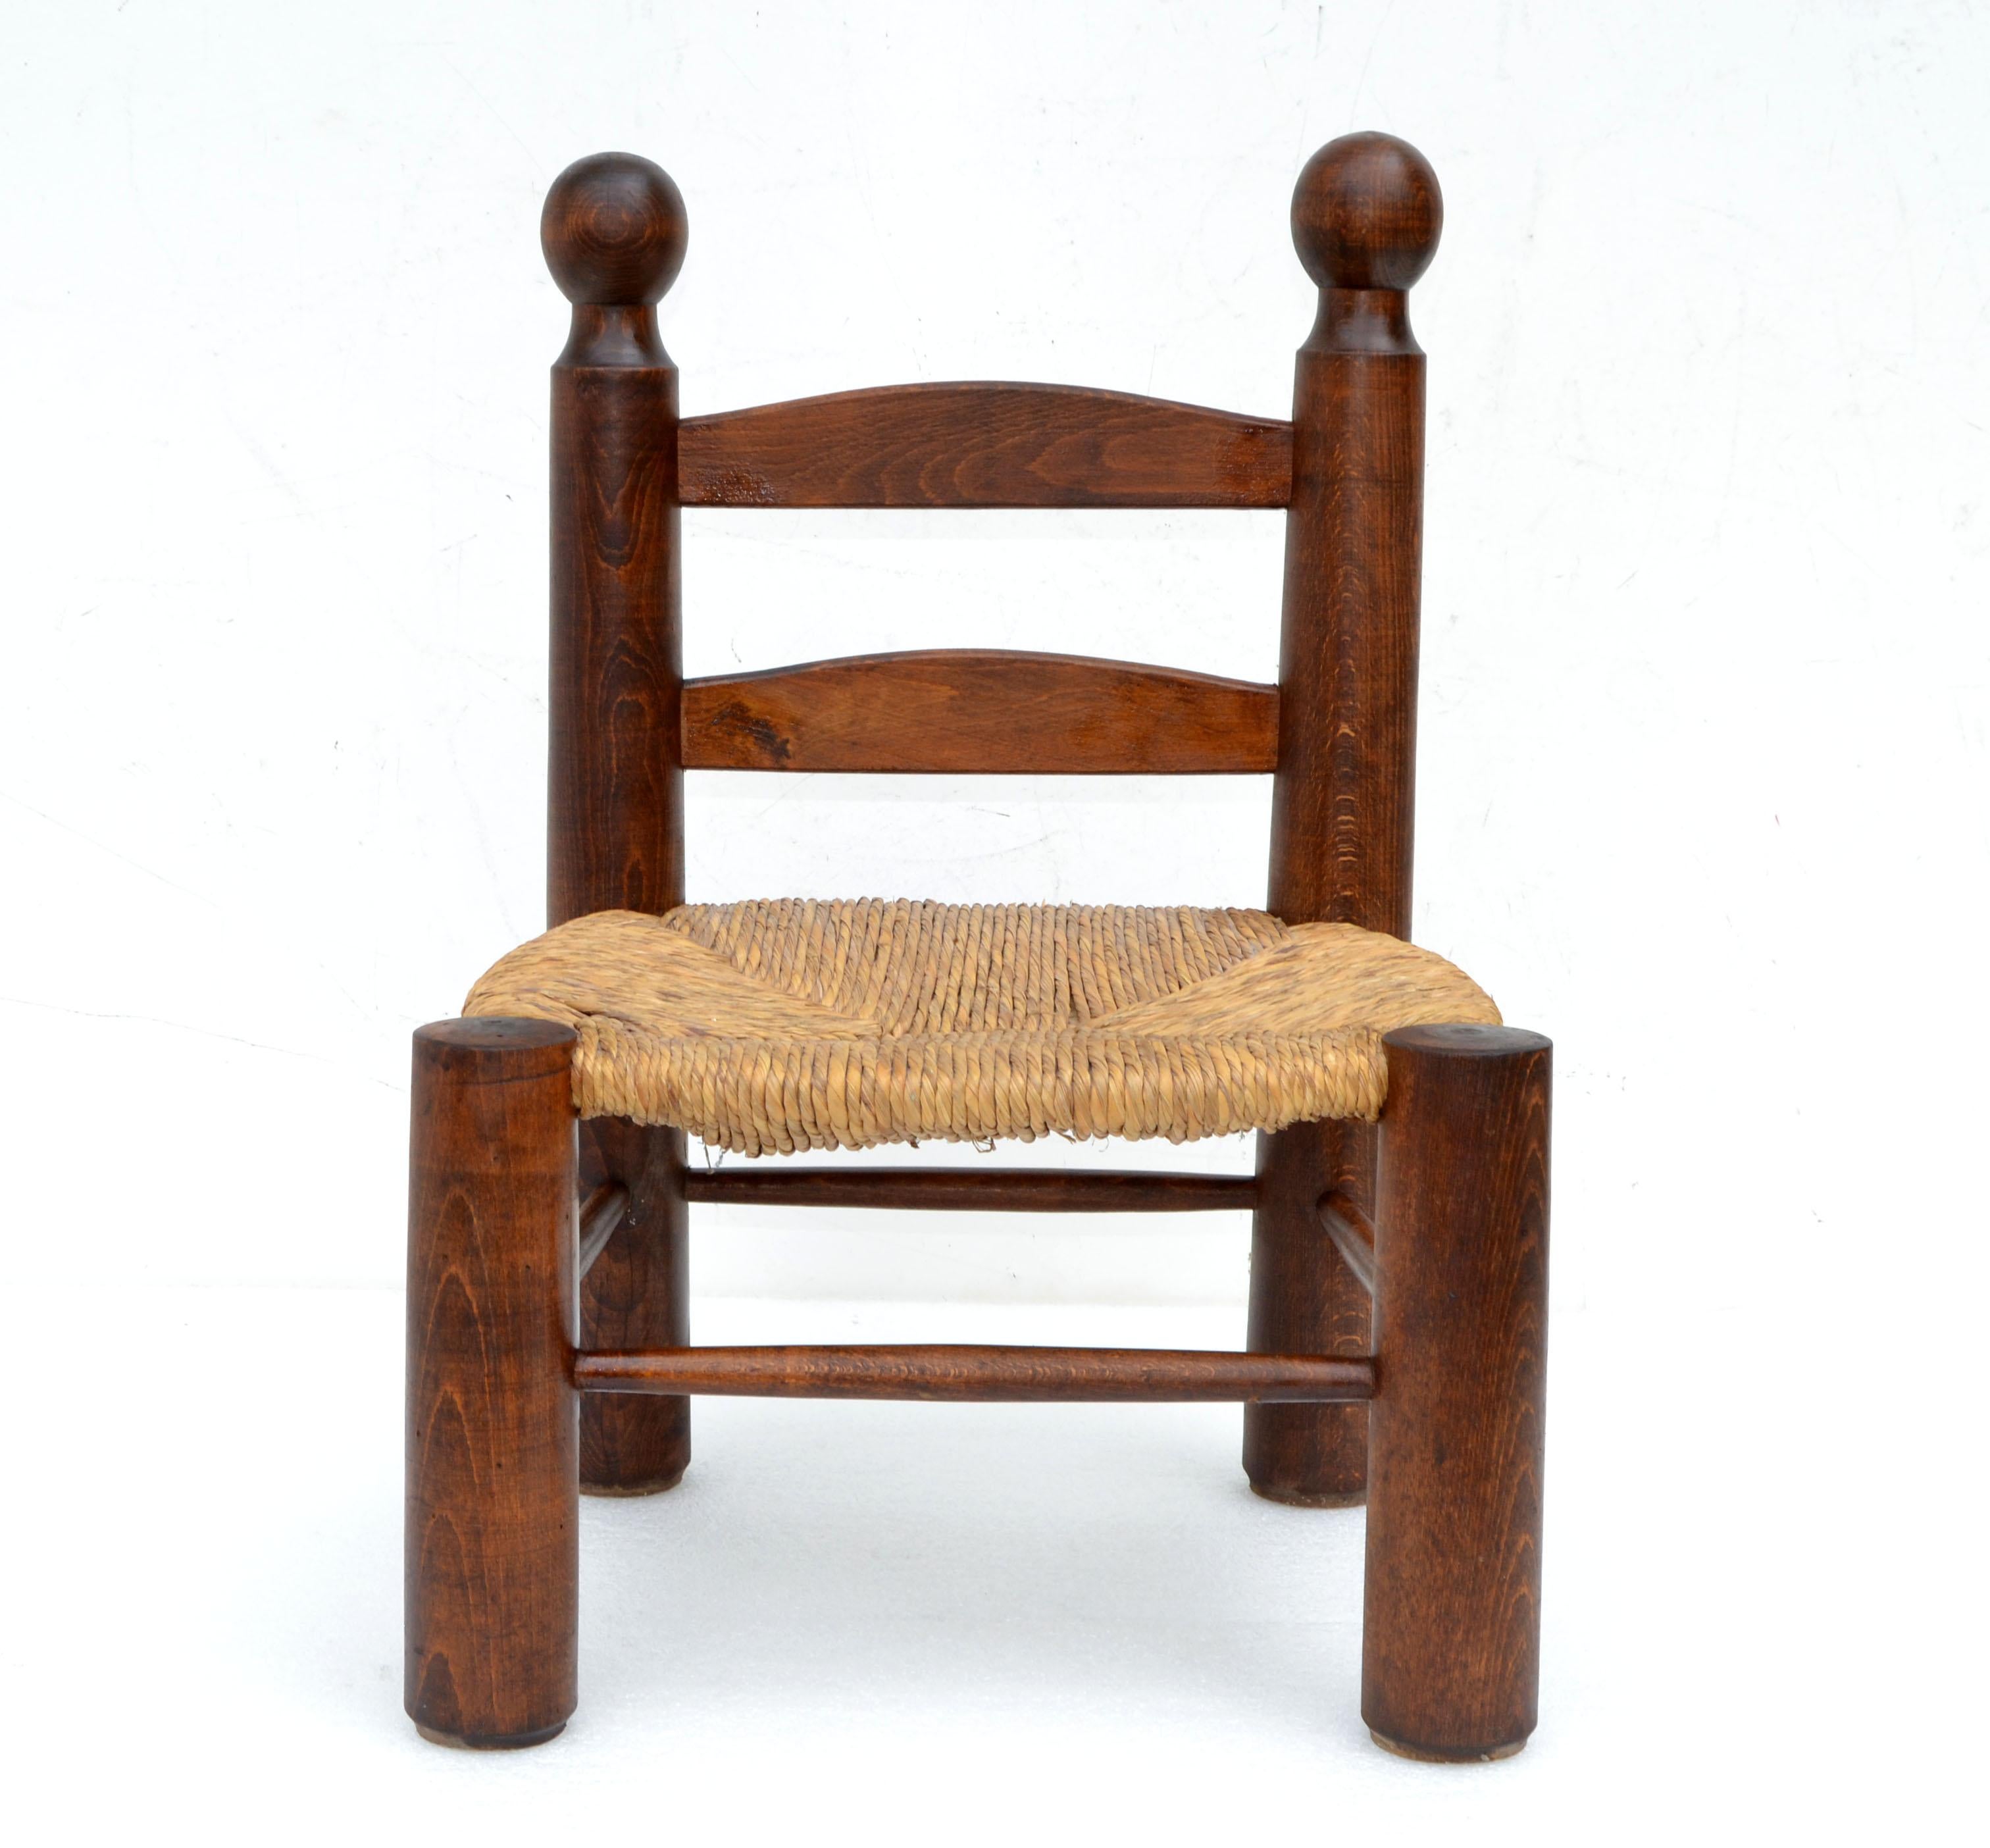 Very rare Kid's Chair in the manner of Charlotte Perriand.
Turned oak wood core with handwoven rush seat which is in perfect original condition.
Warm wood color and patina.
Real Vintage Collectible Children's Furniture.